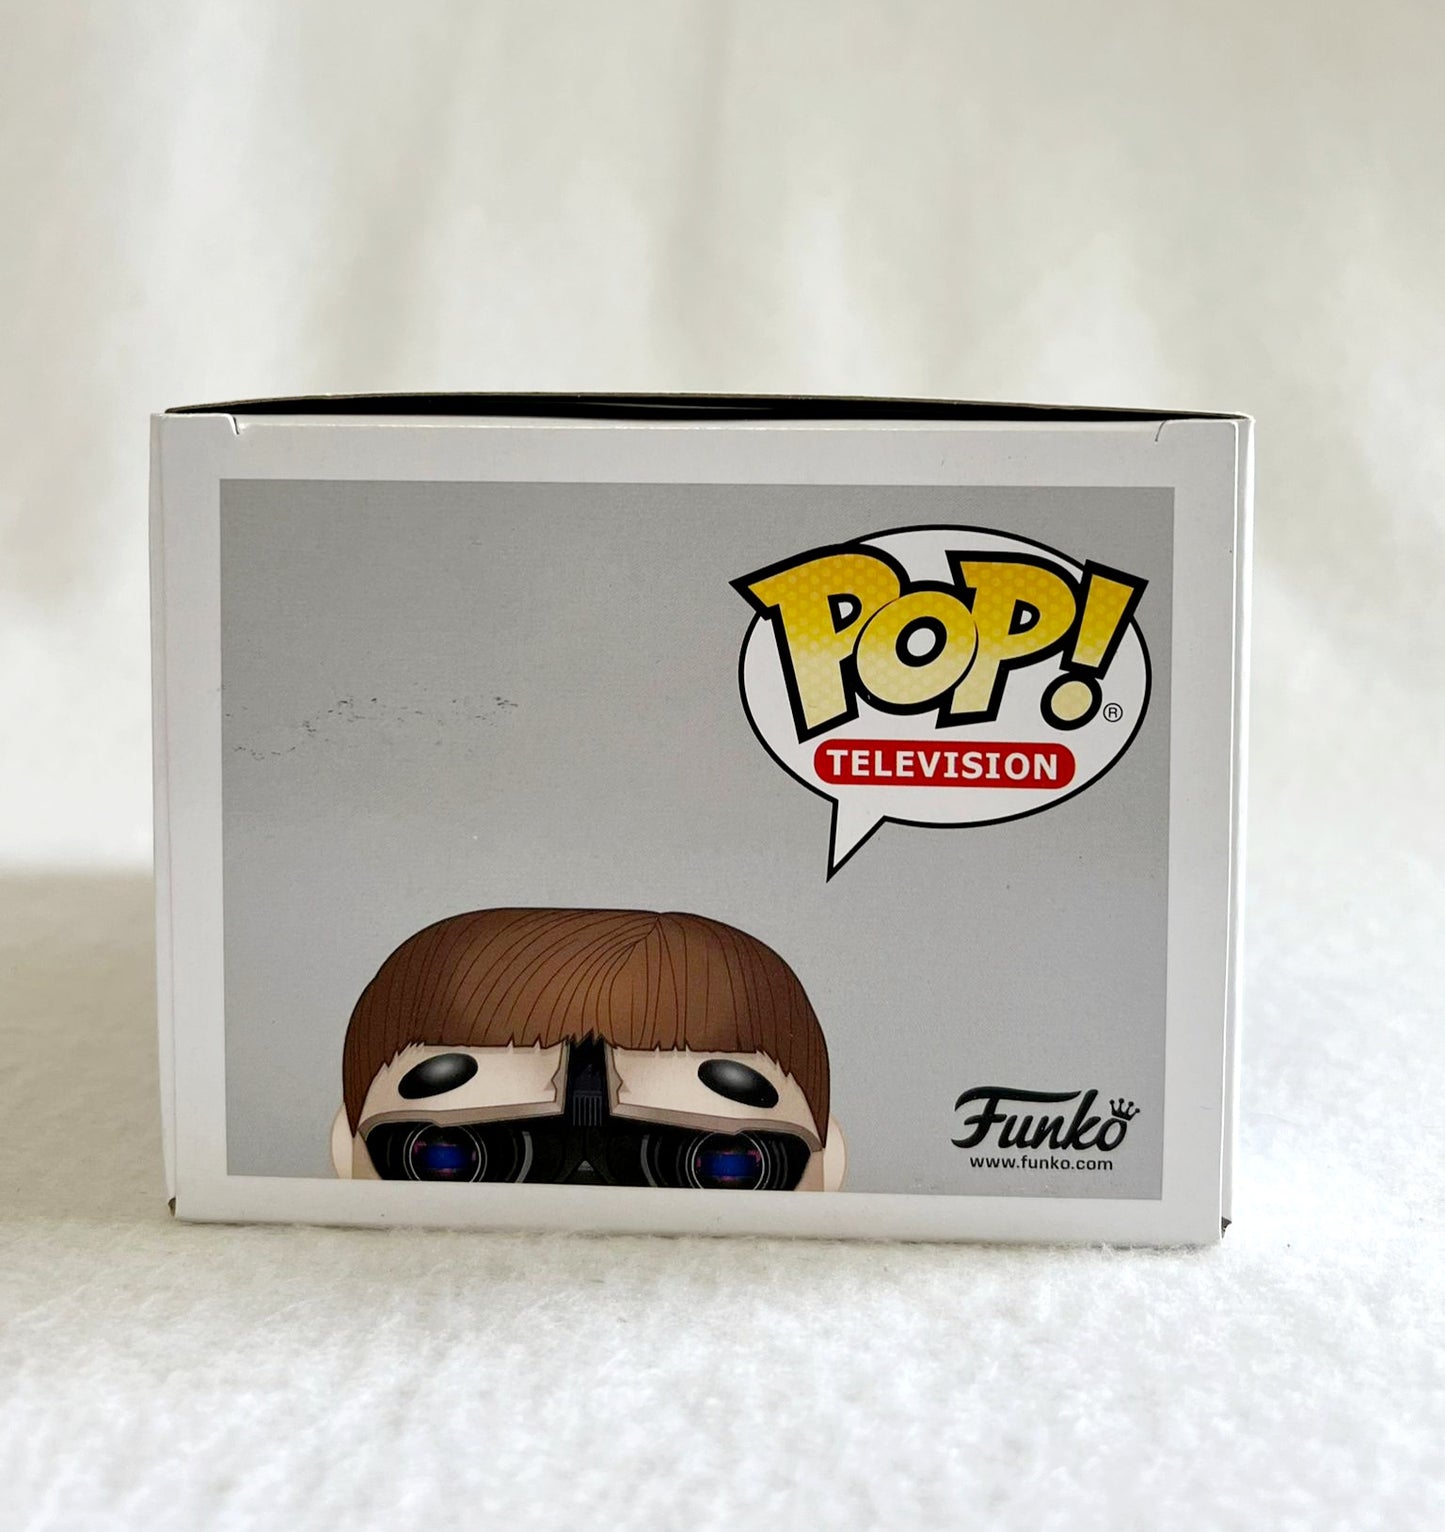 FUNKO POP!! #491 YOUNG FORD 'WestWorld'